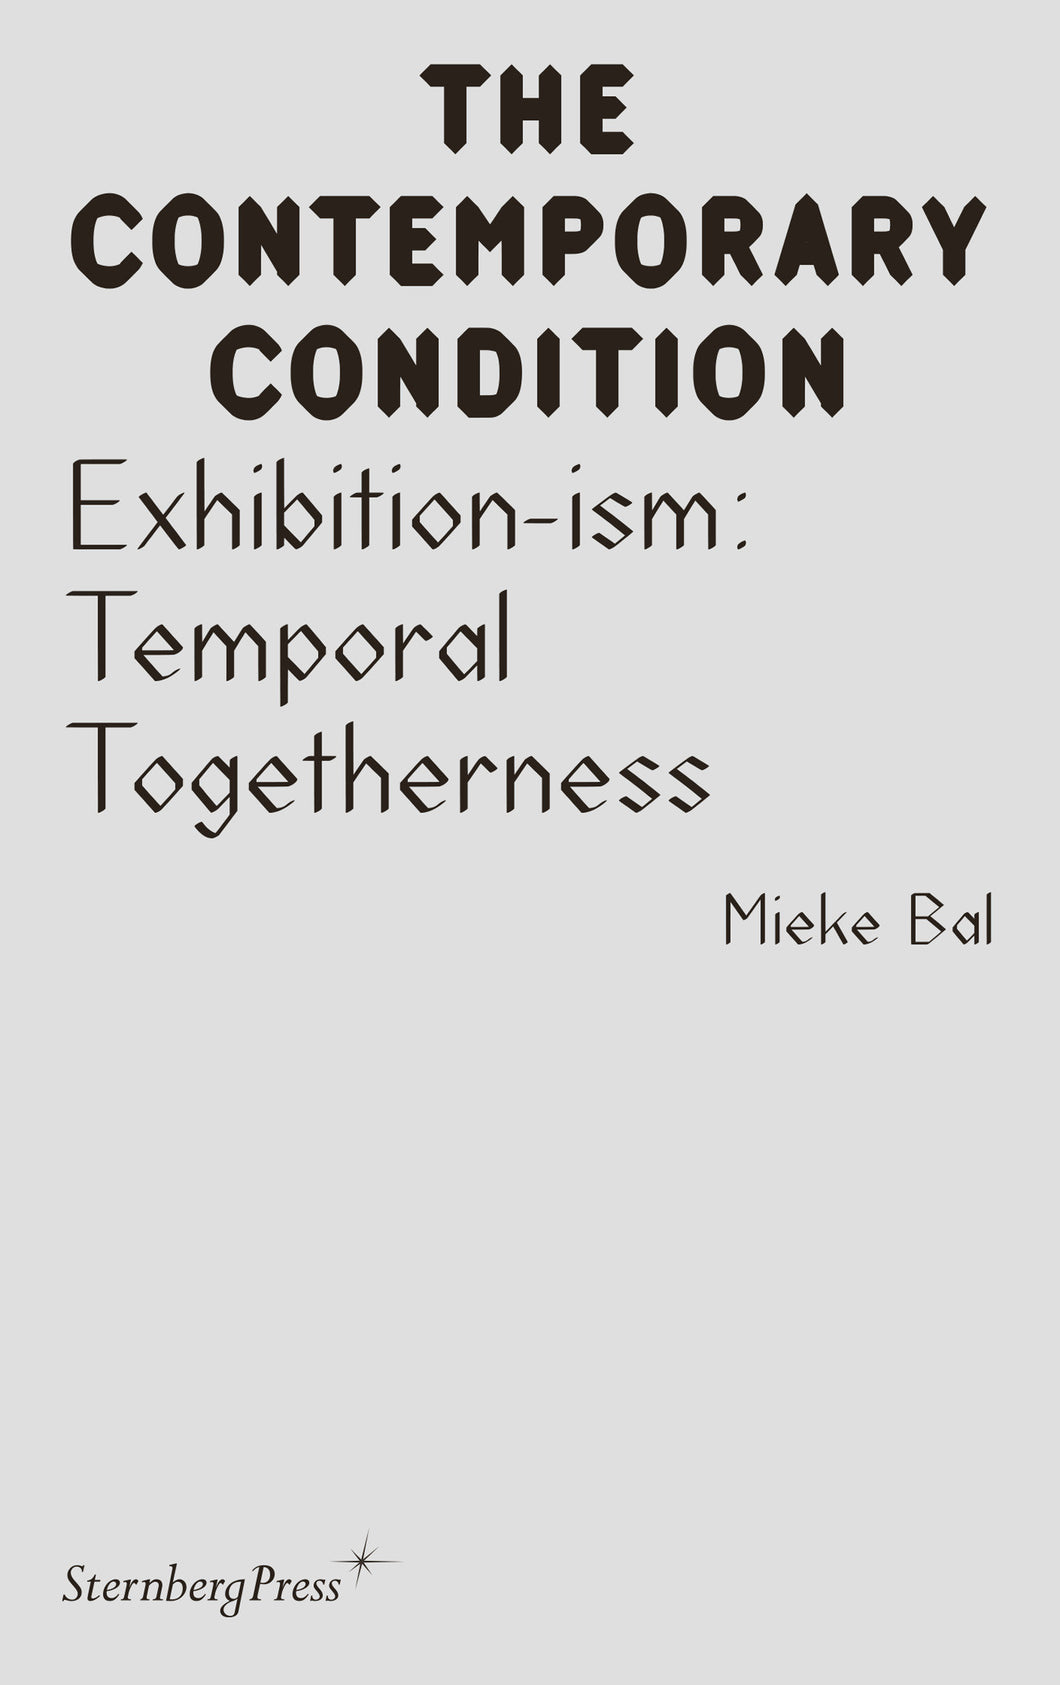 Exhibition-ism: Temporal Togetherness